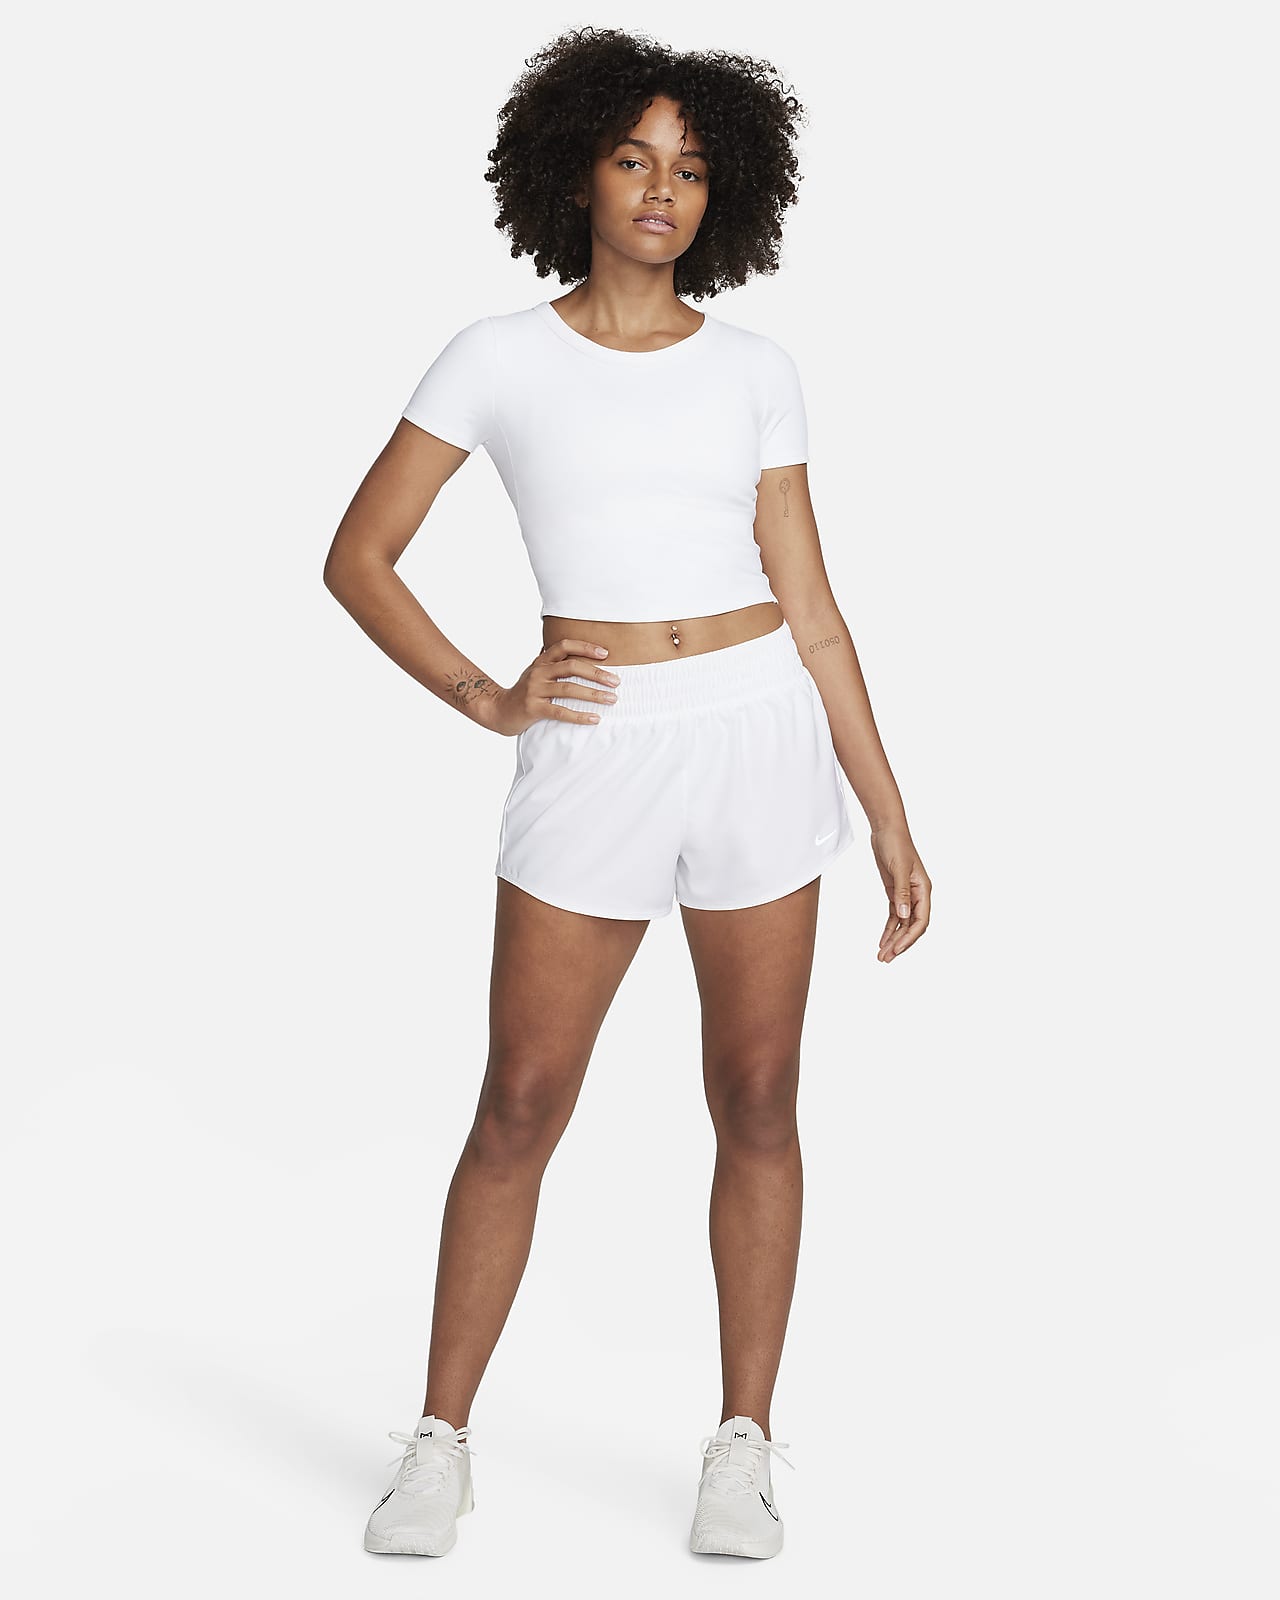 Nike One Fitted Women's Dri-FIT Short-Sleeve Cropped Top.